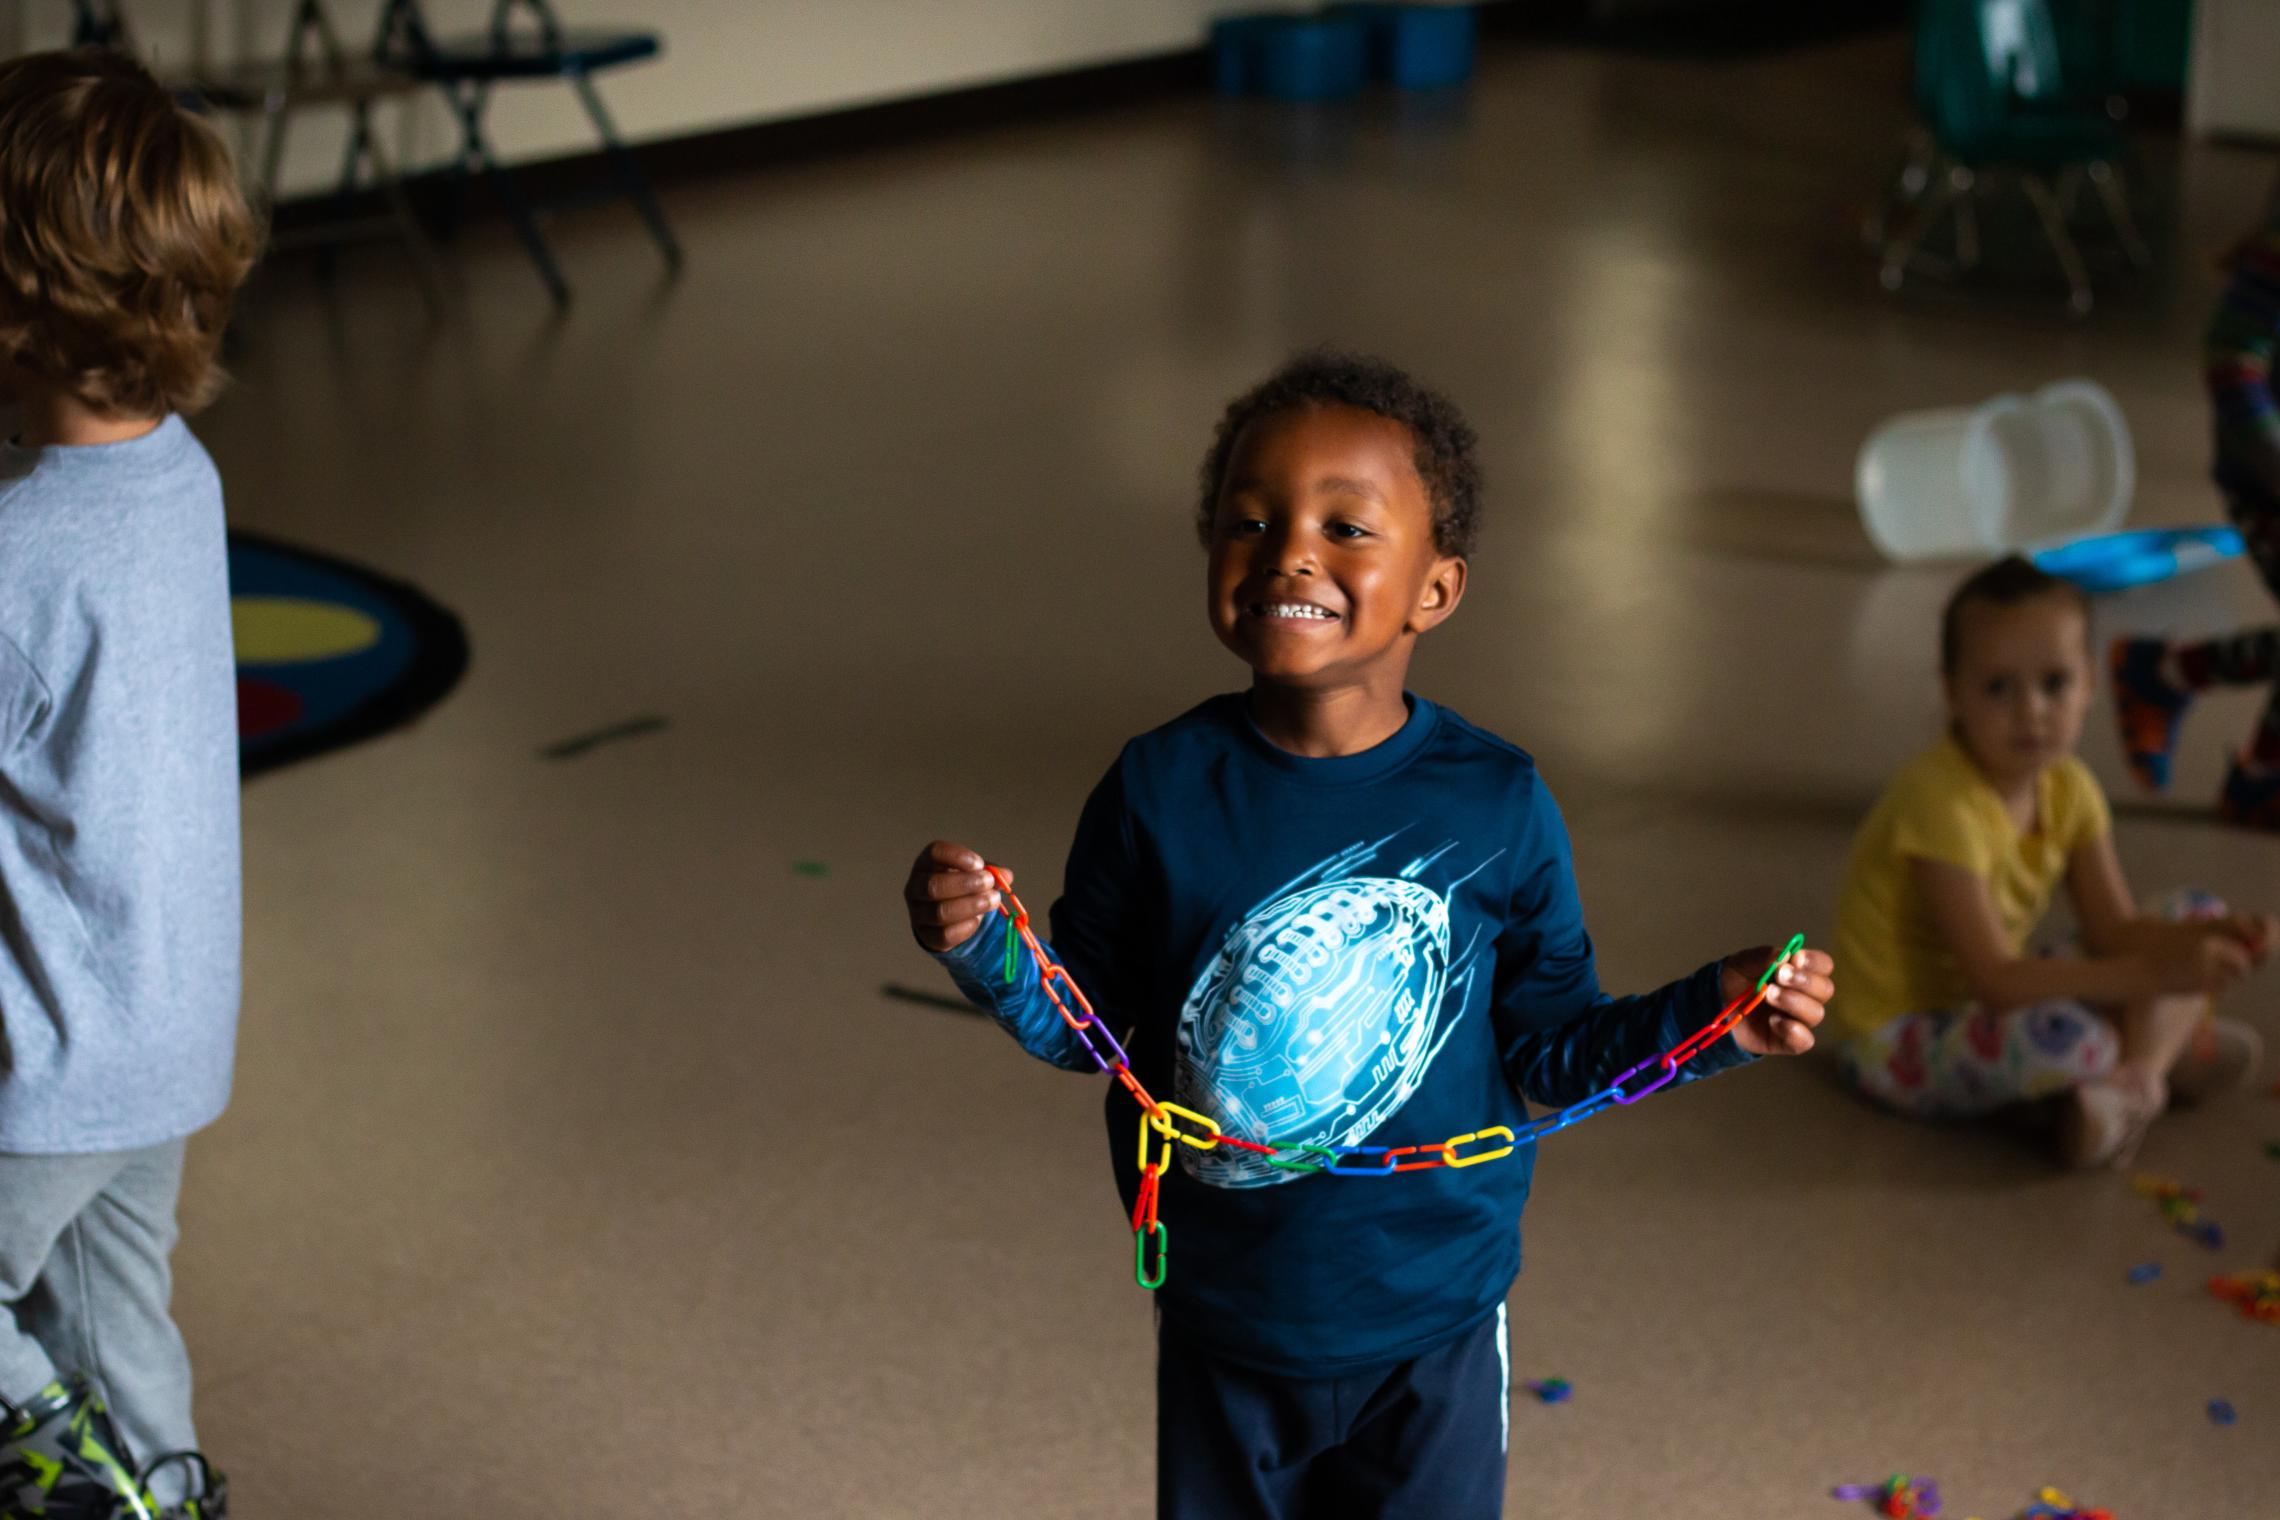 Summer camp participant holding up a colorful toy chain link while playing at they YMCA